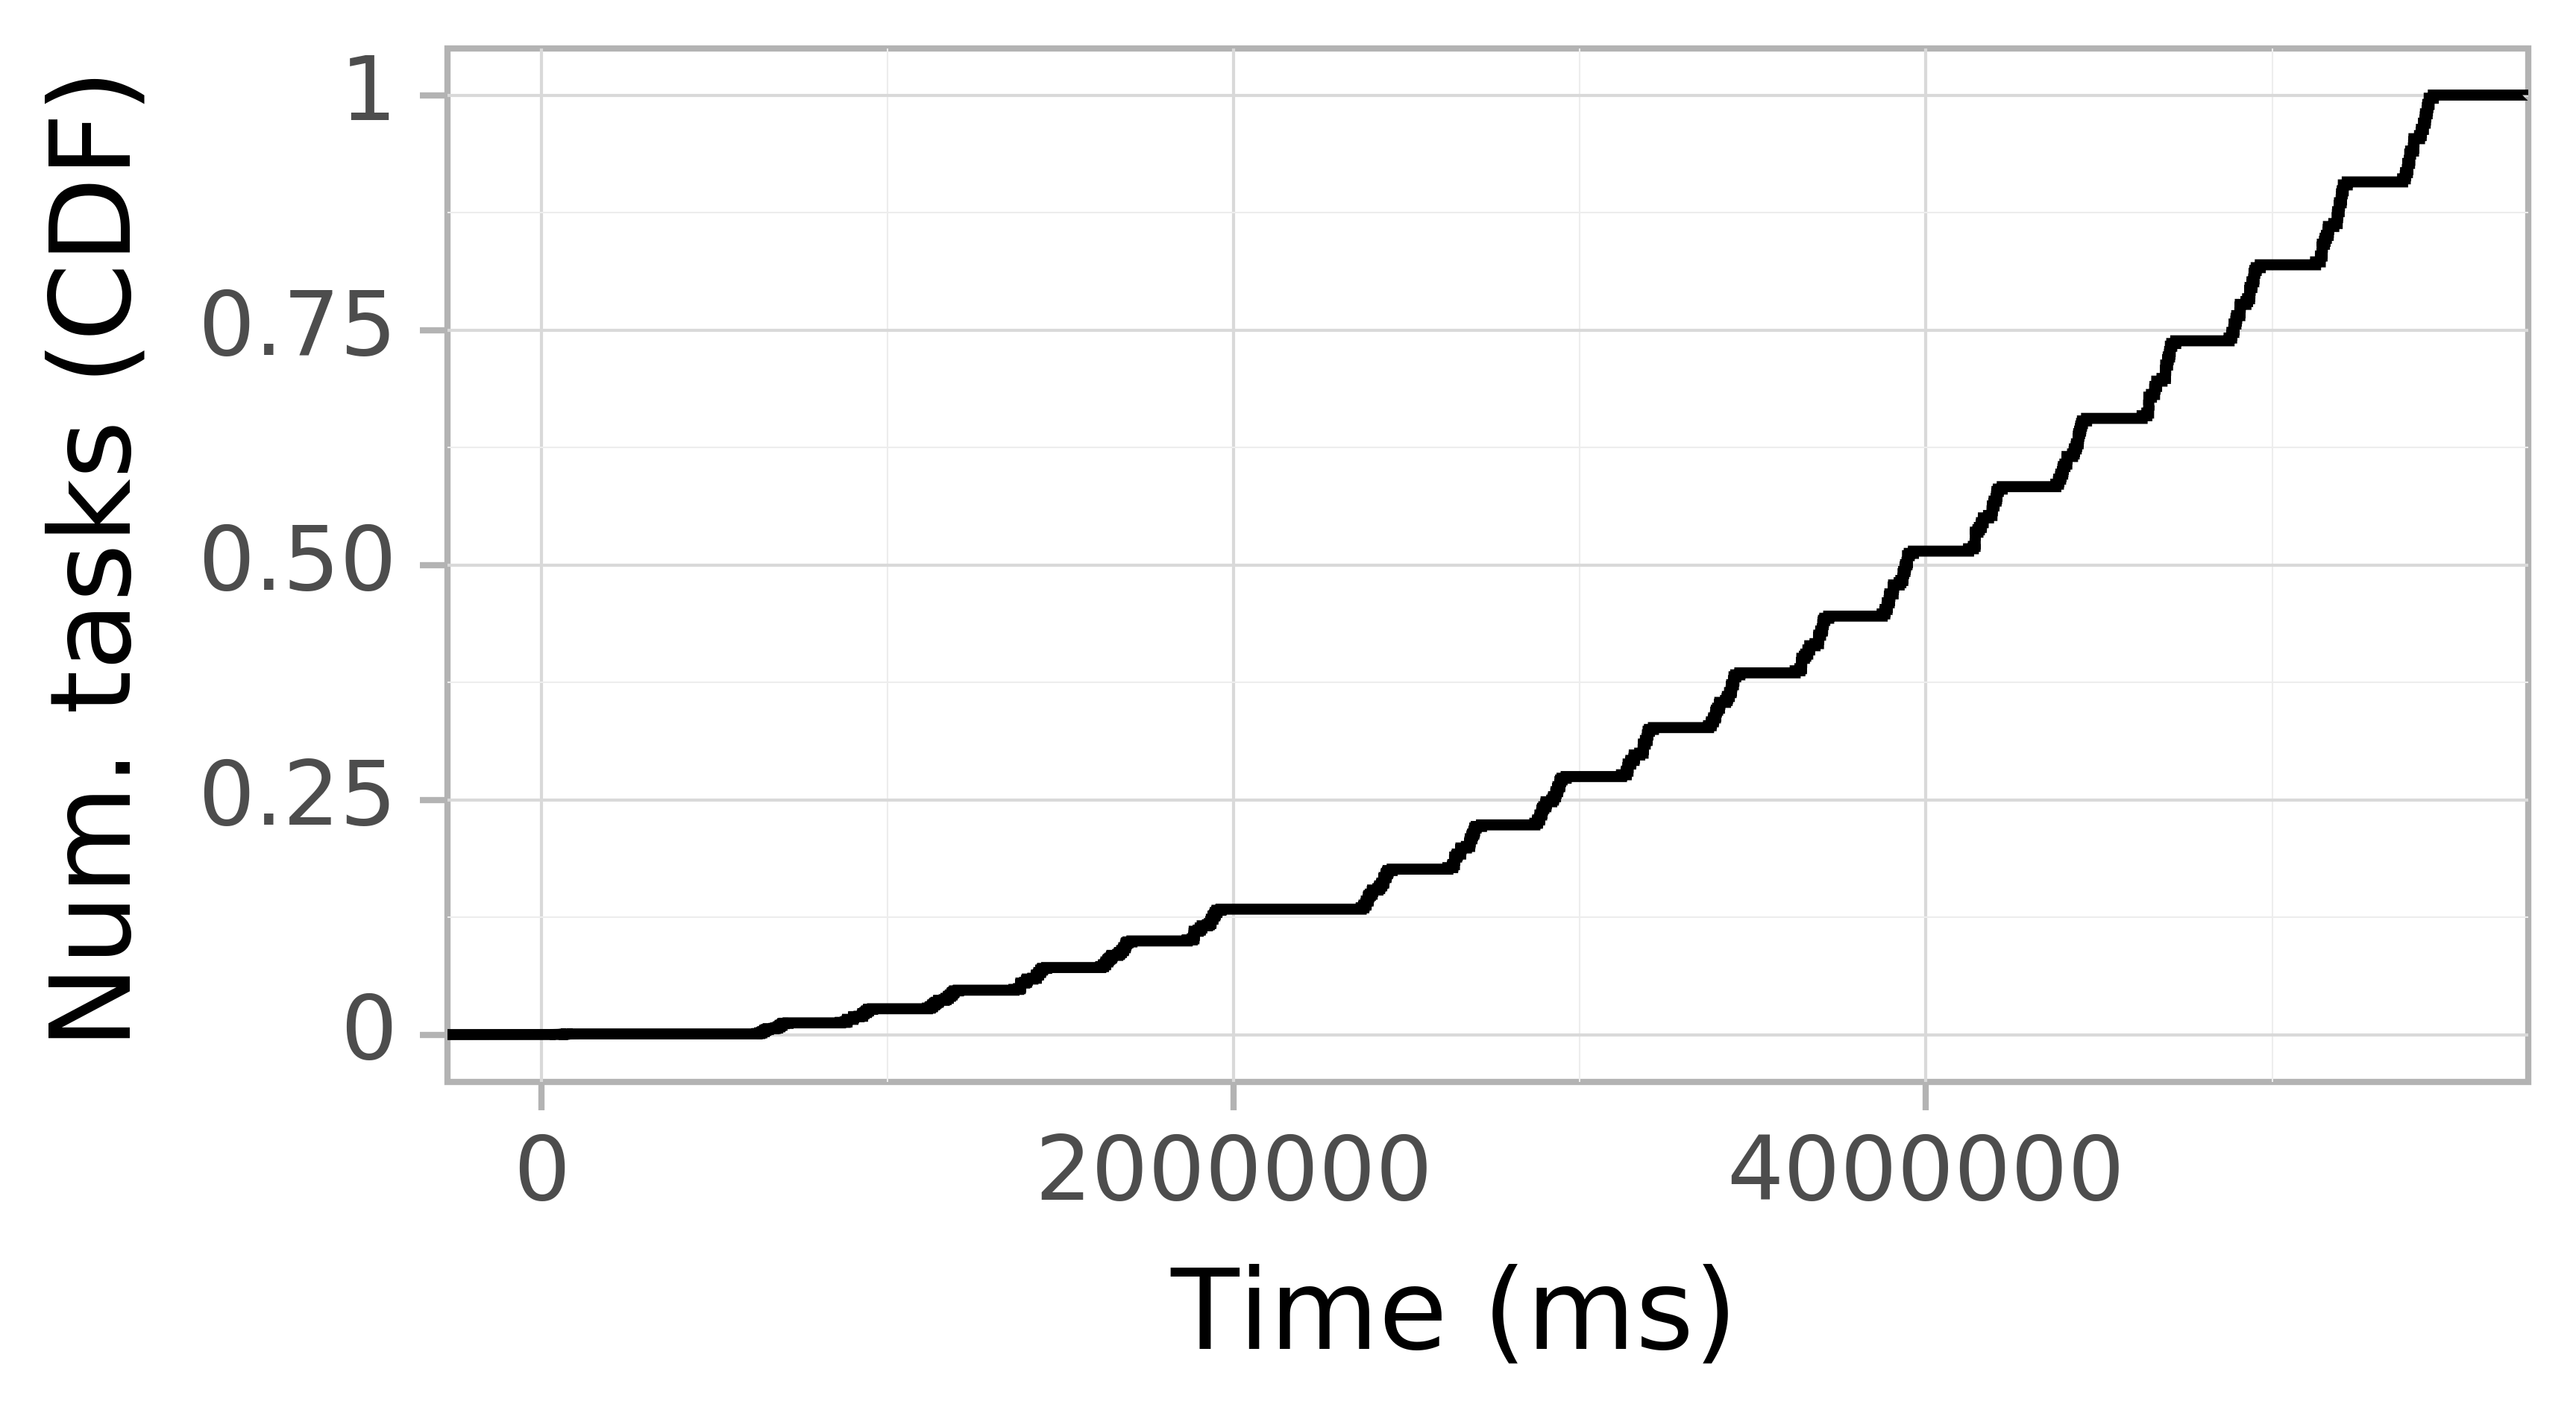 Task arrival CDF graph for the askalon-new_ee40 trace.